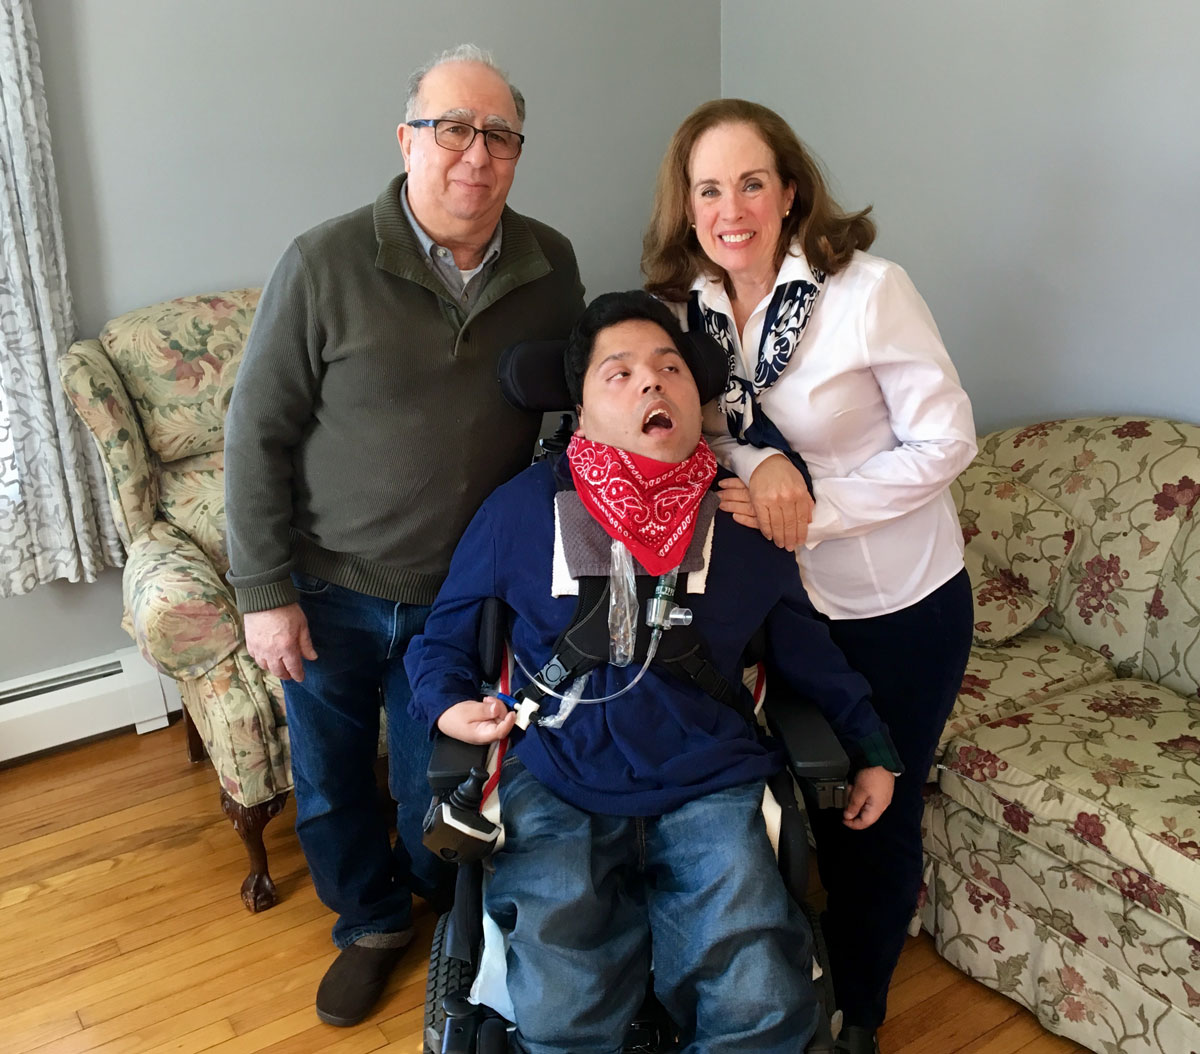 Mother and Father with son who is confined to a wheelchair